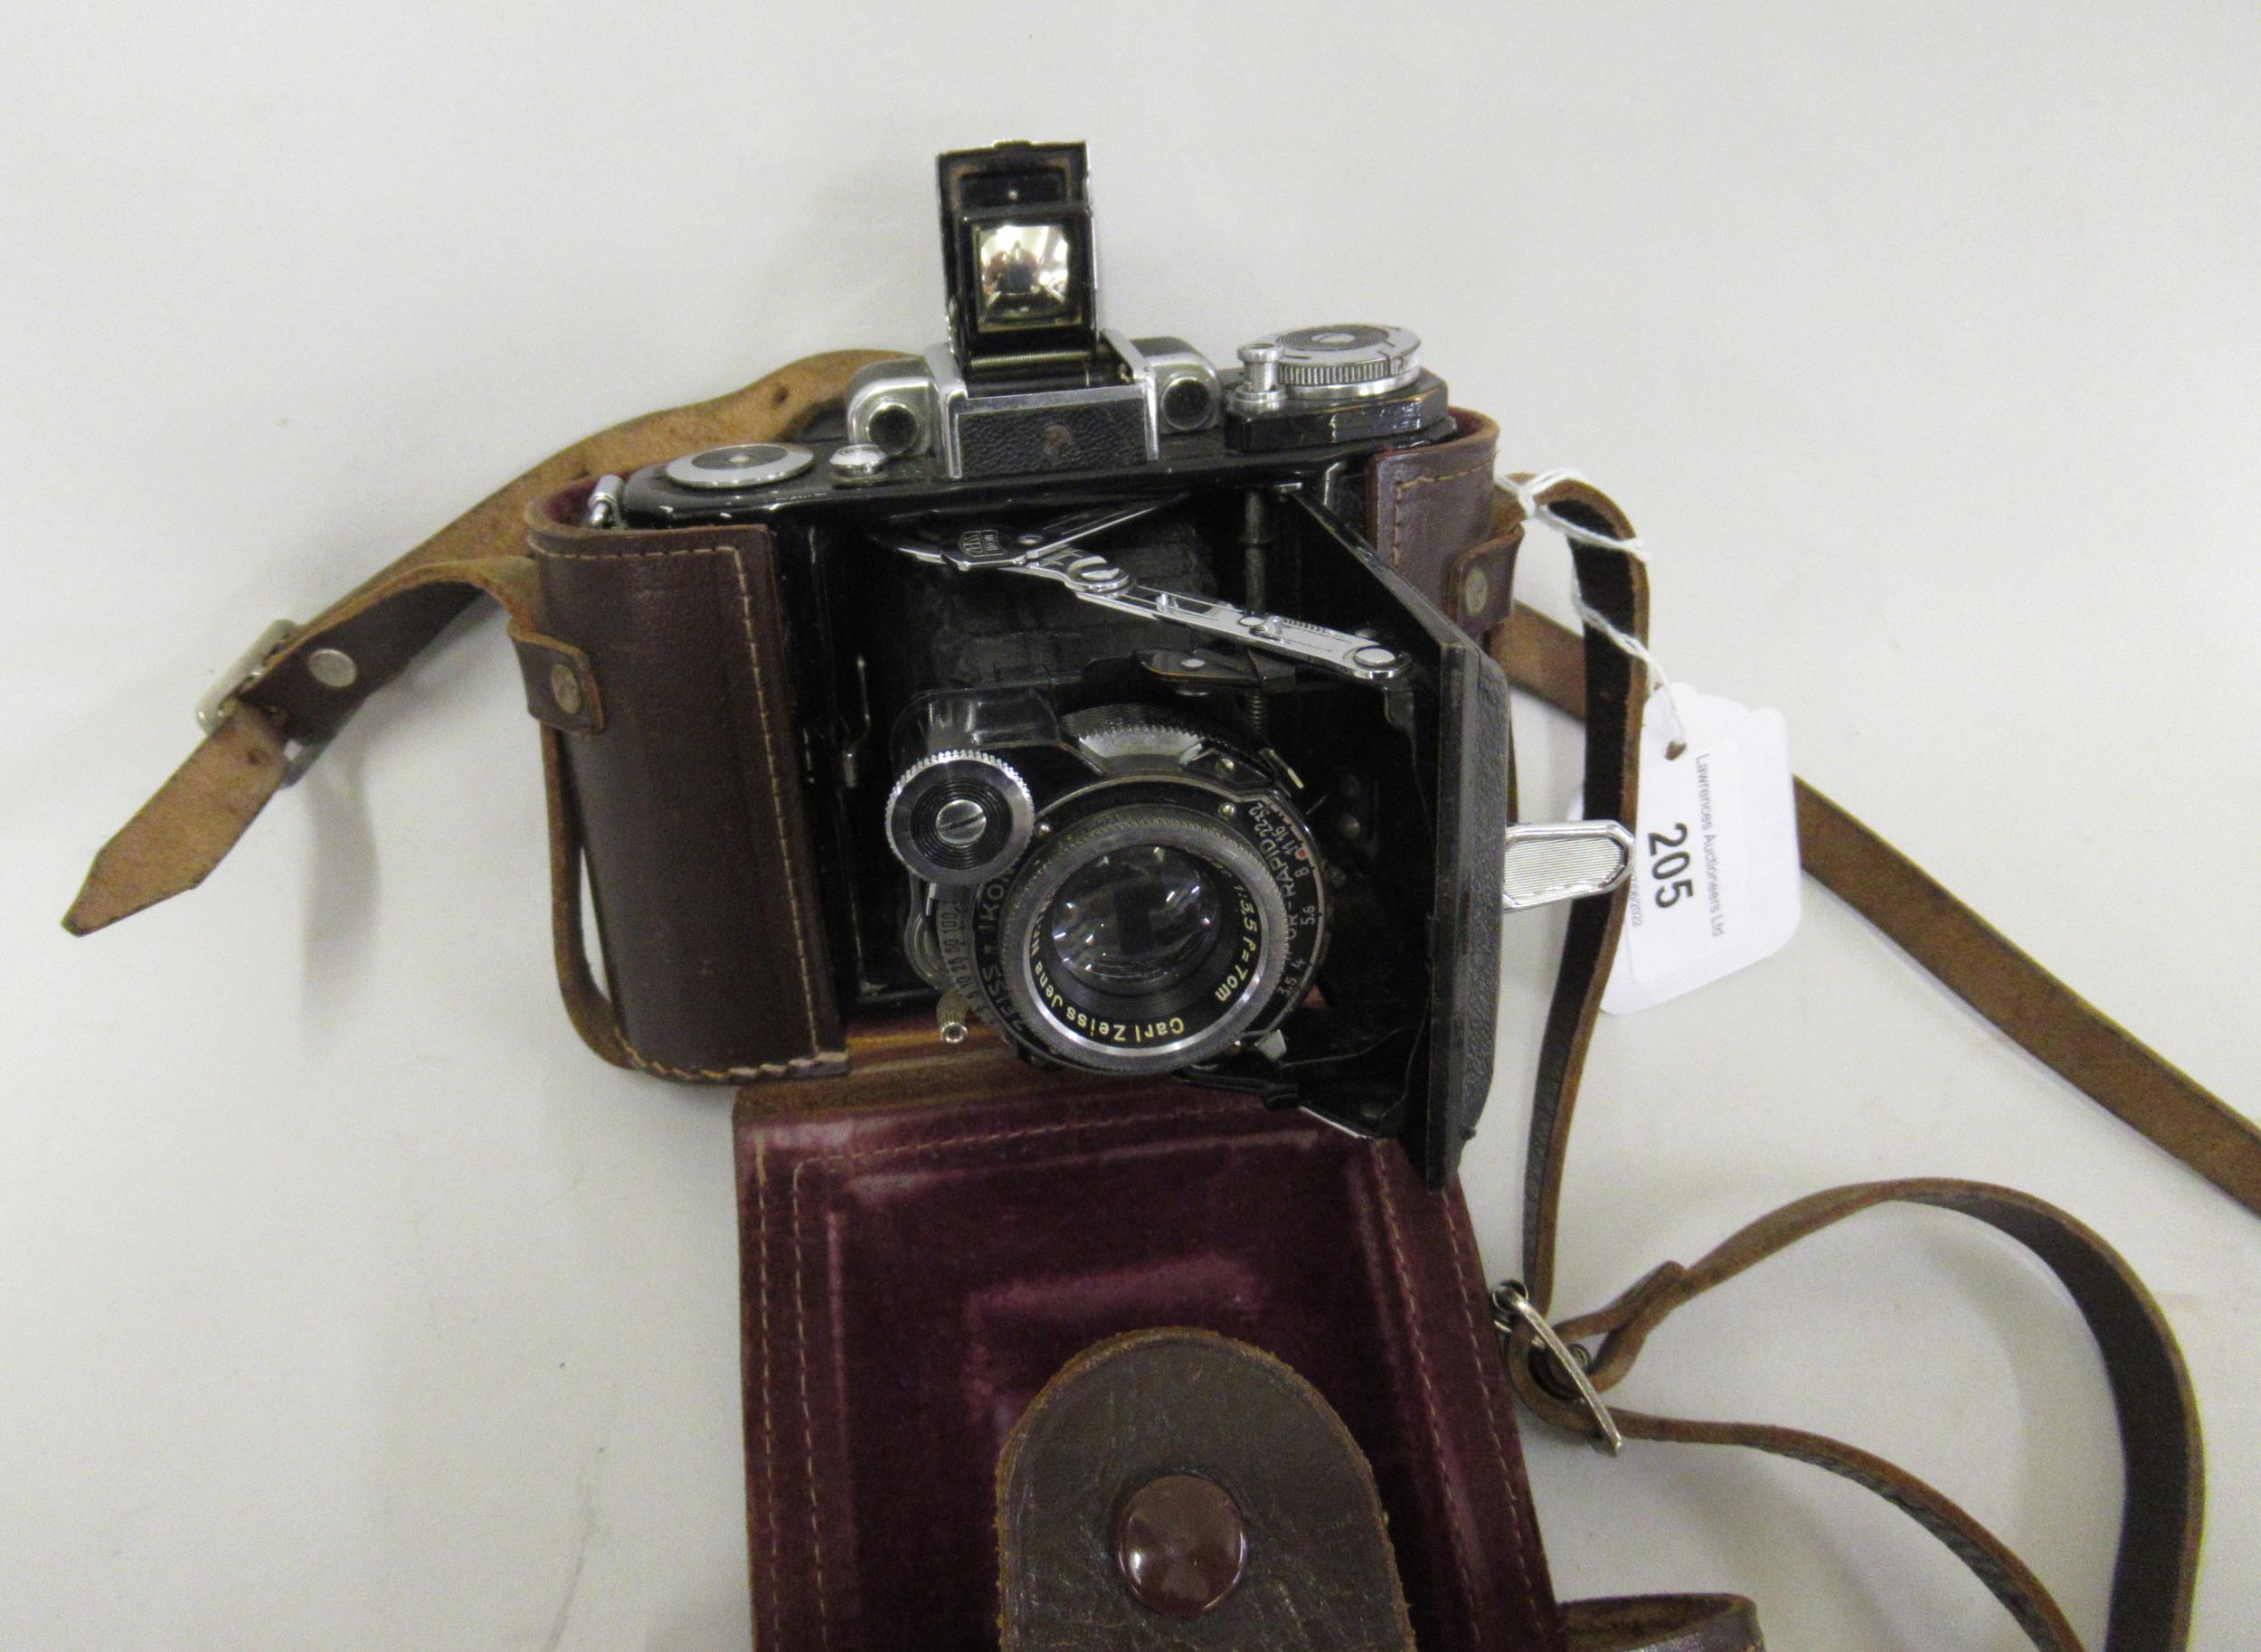 Zeiss Icon 6 x 9 camera with Tessar lens, in original brown leather case